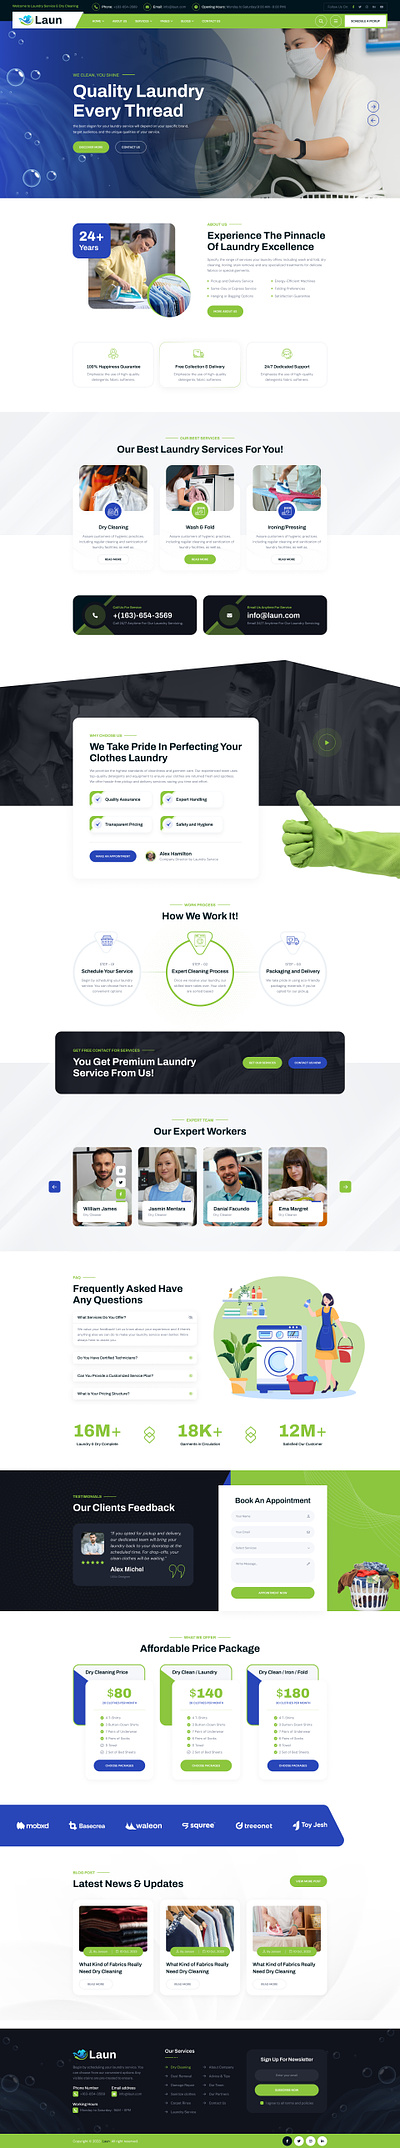 Laun - Laundry Service & Dry Cleaning HTML Template maid service